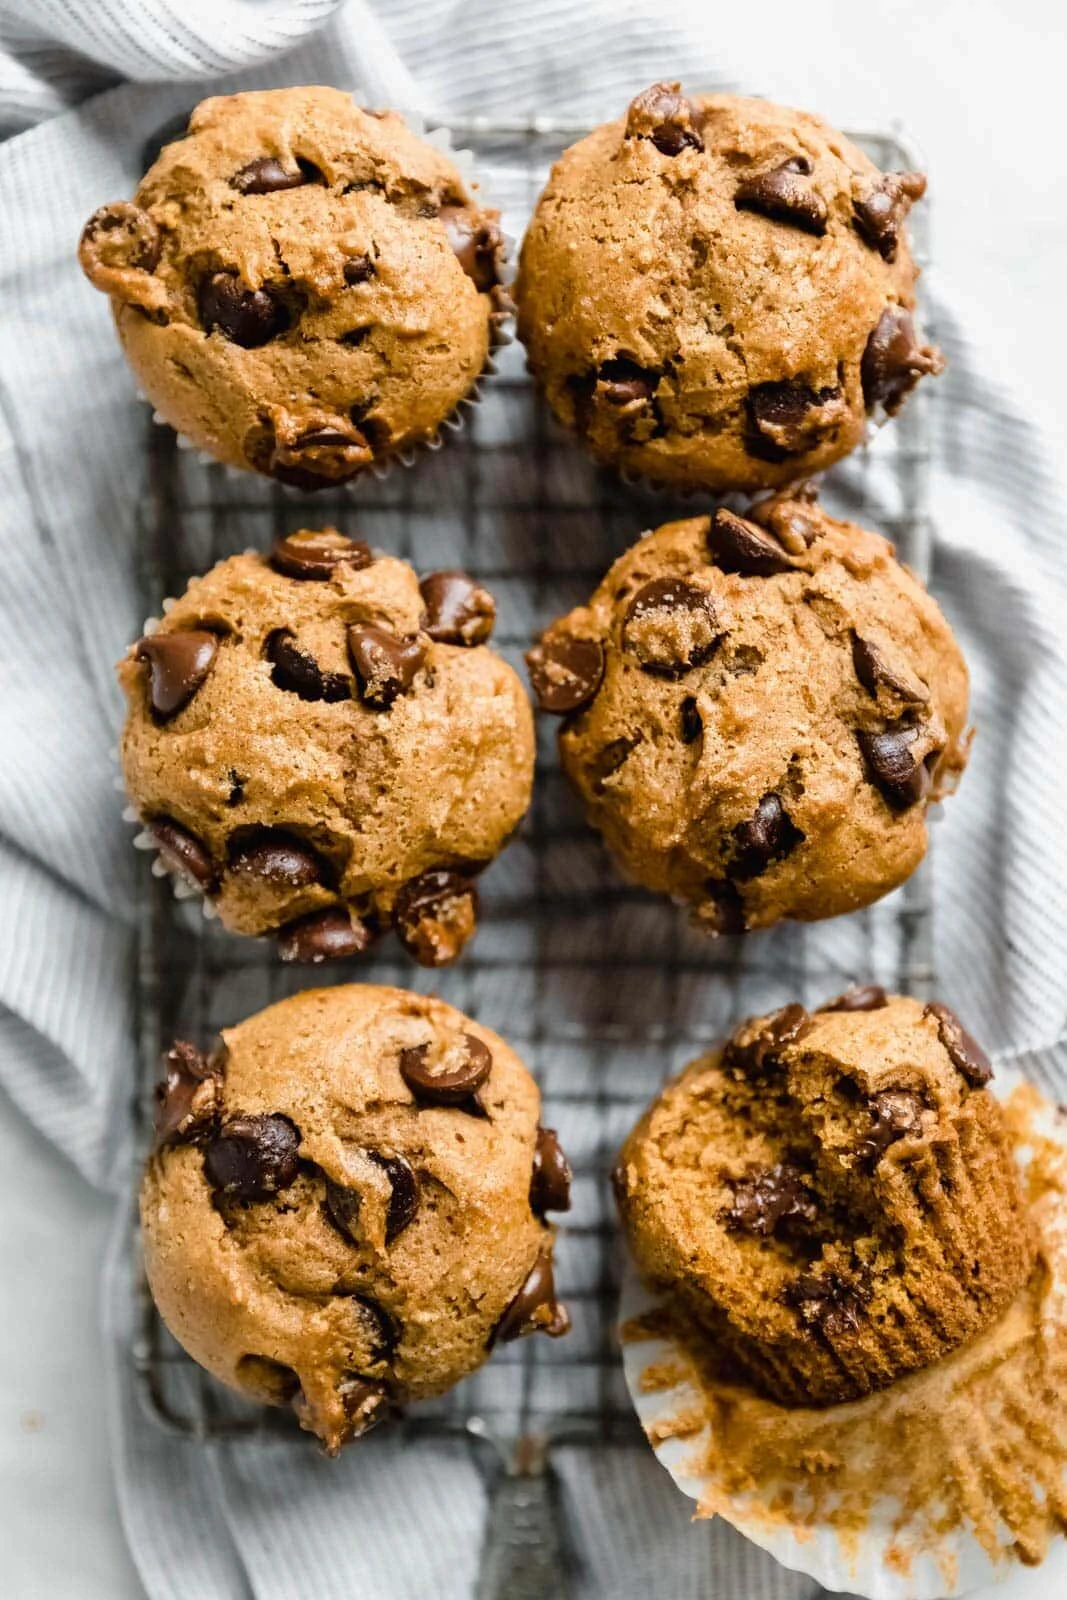 Absurdly moist Pumpkin Chocolate Chip Muffins made with cinnamon, nutmeg, ginger, and giant chocolate chips! Bonus: freeze them for an easy weekday treat!